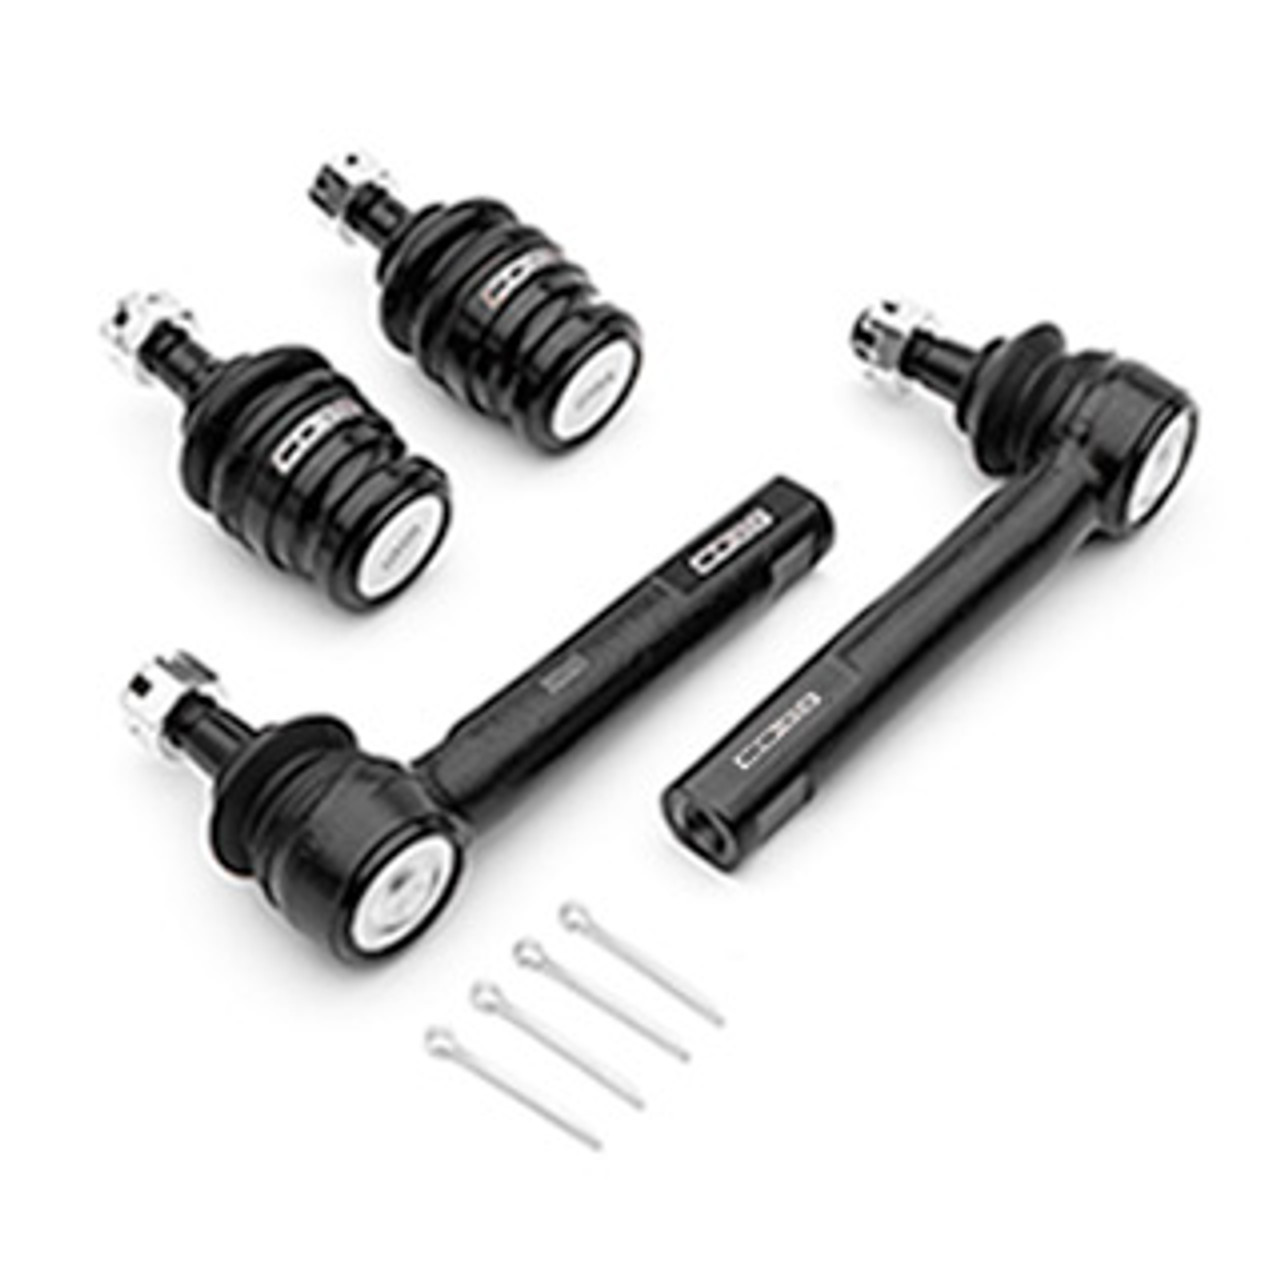 SUBARU TRACK RAT SUSPENSION PACKAGE  - FRONT ROLL CENTER BUMP STEER KIT